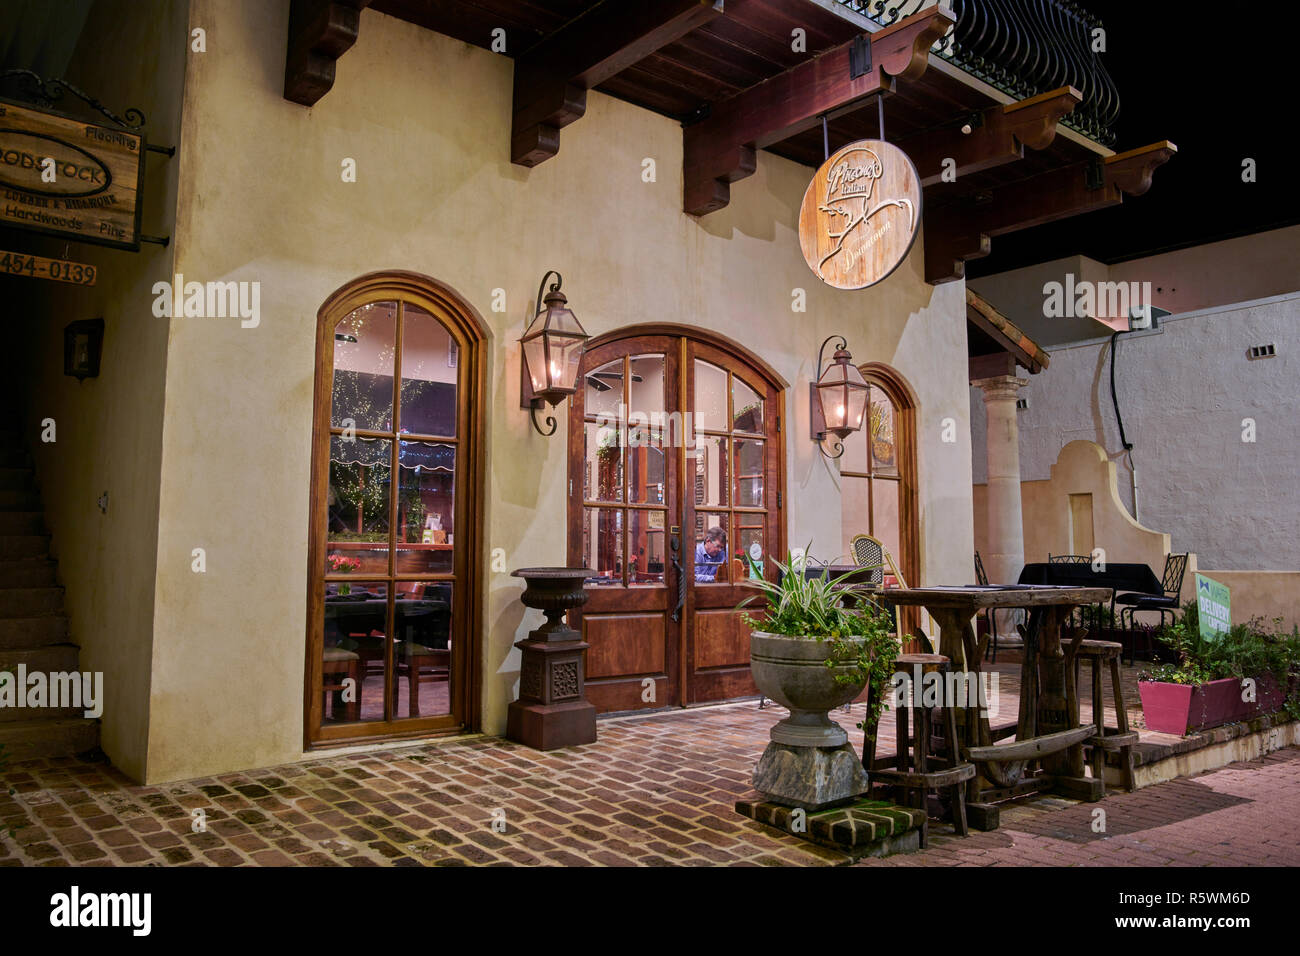 Italian Downtown restaurant front exterior entrance at night in Fairhope Alabama, USA. Stock Photo